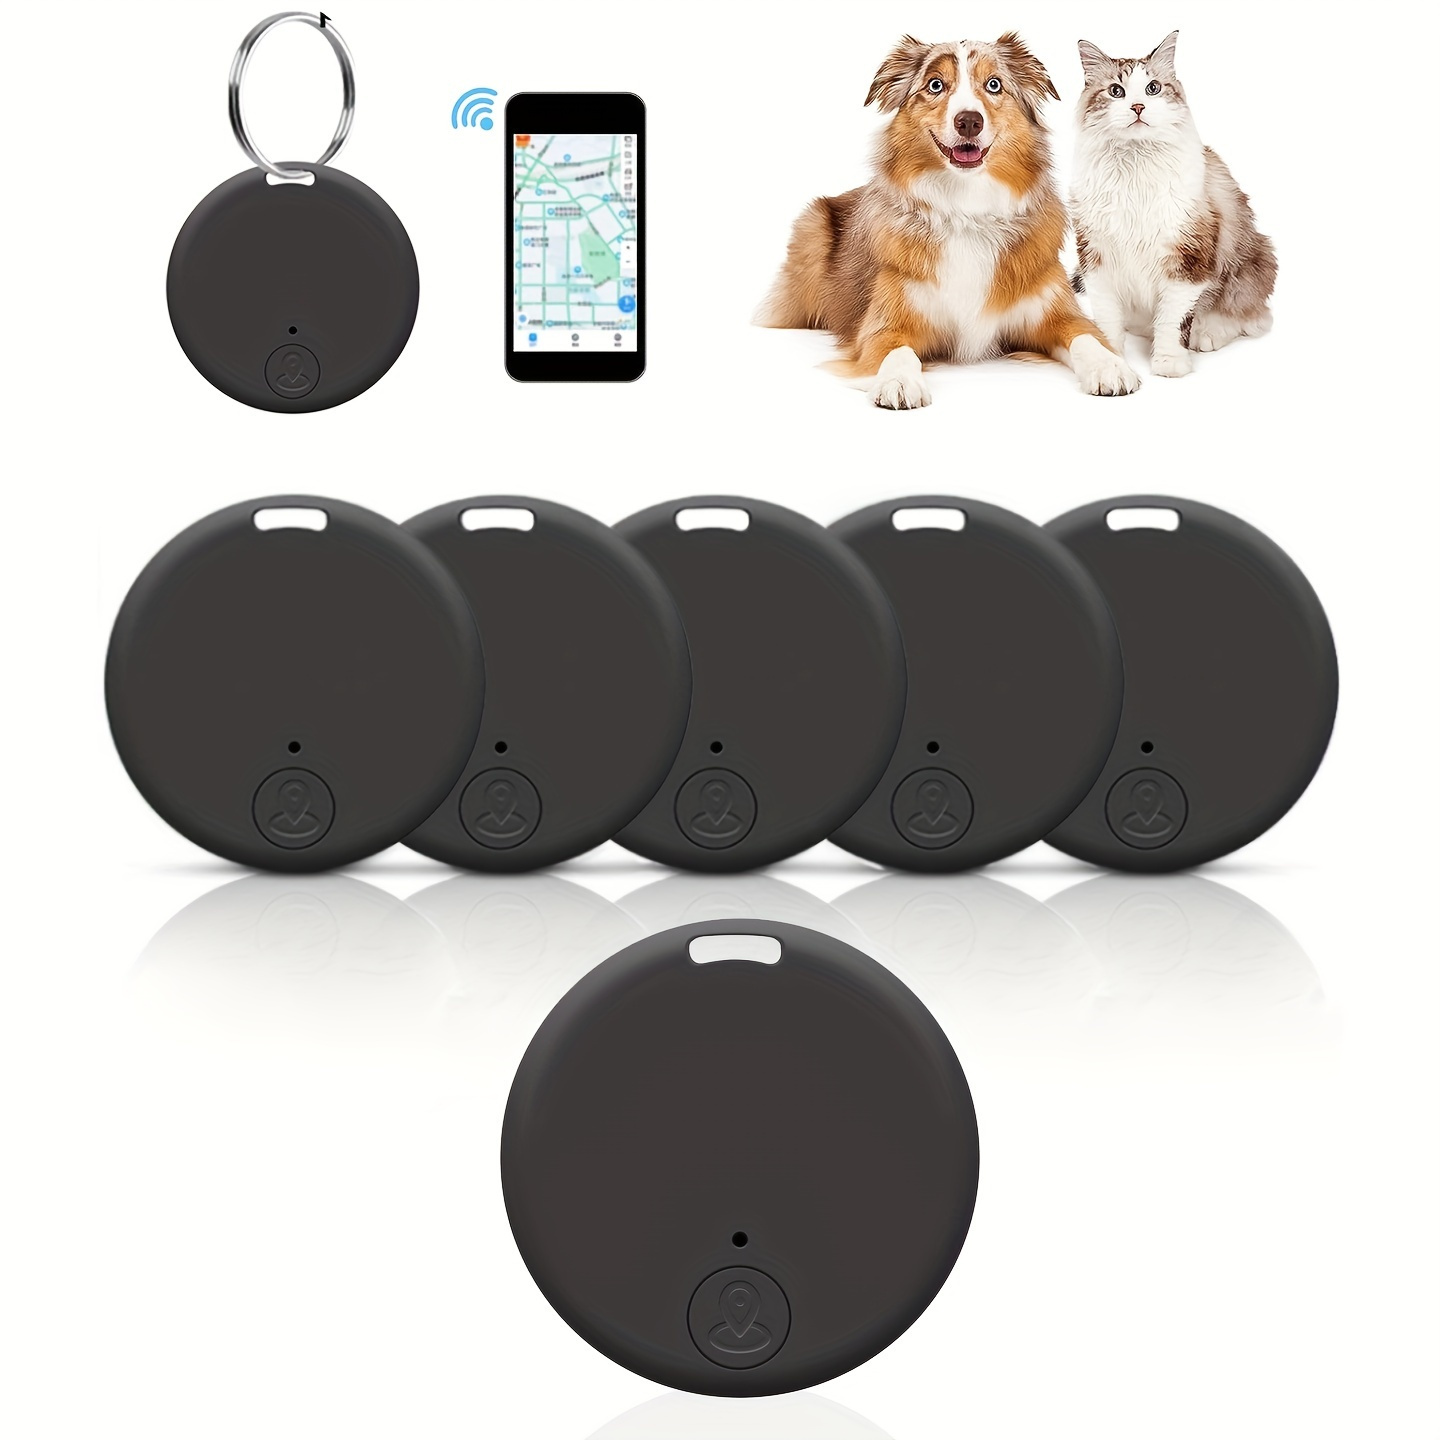 

6packs Key Finders, Portable Tracking Mobile Tracking Anti Loss Smart Device Locator Finders Device For Dog Pet Cat Wallet Keychain Luggage, Alarm Reminder